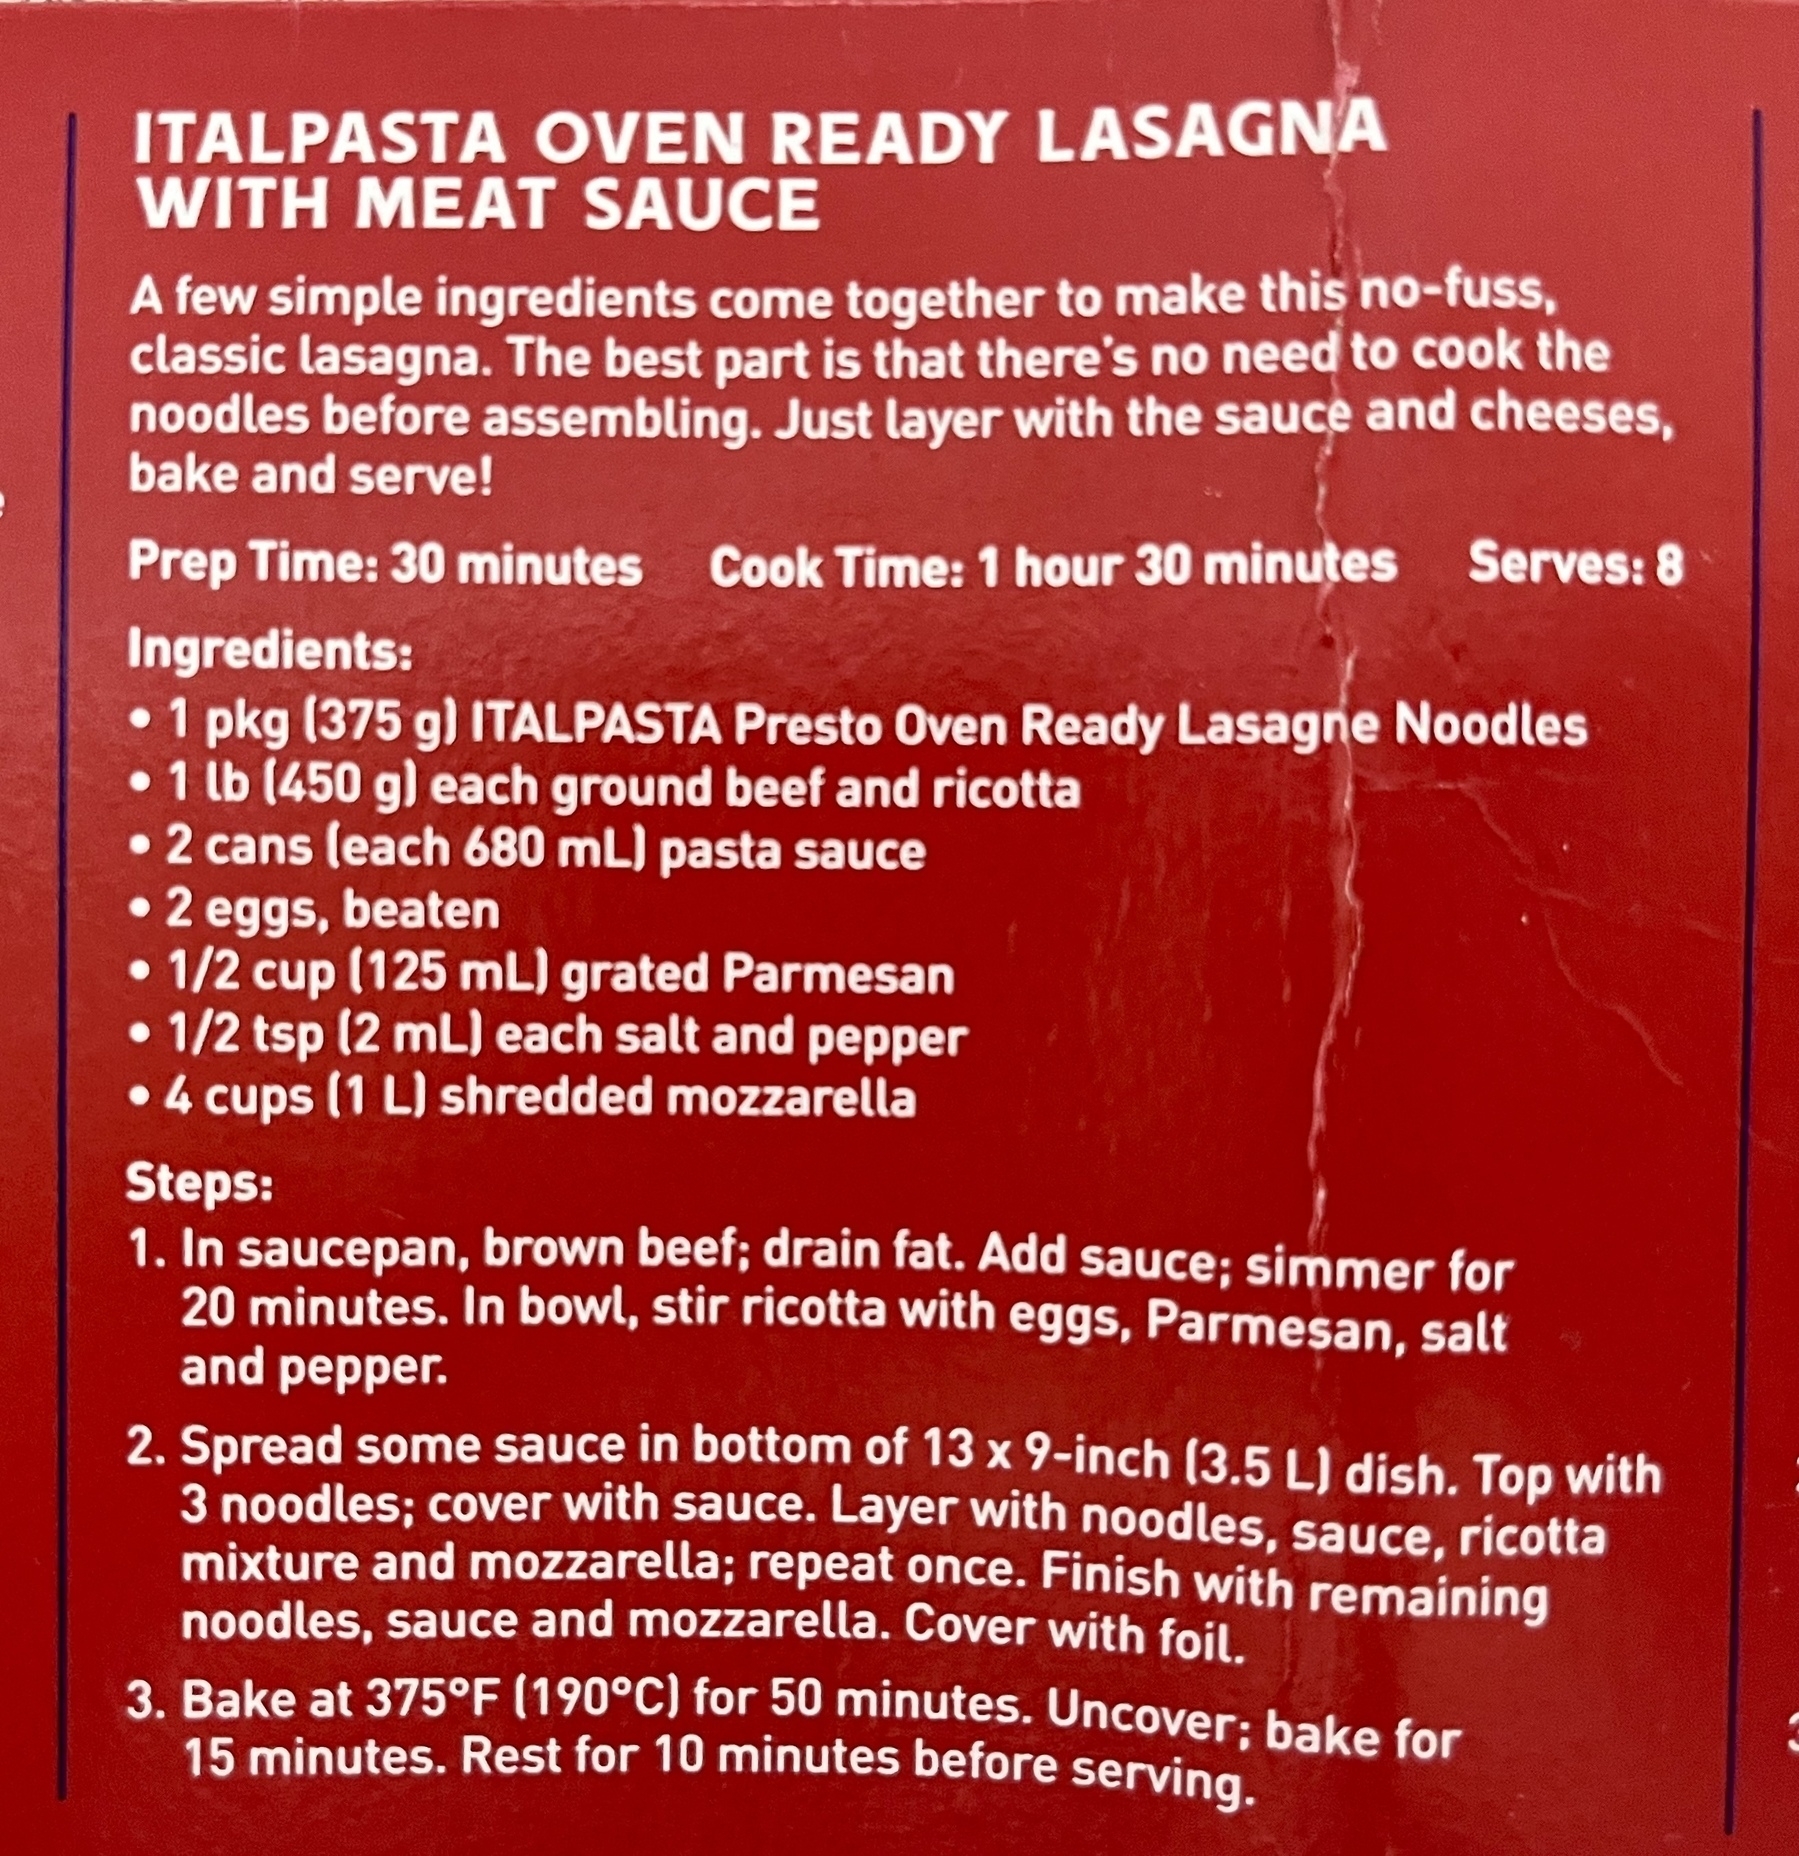 A few simple ingredients come together to make this no-fuss, classic lasagna. The best part is that there's no need to cook the noodles before assembling. Just layer with the sauce and cheeses, bake and serve!&10;&10;Prep Time: 30 minutes Cook Time: 1 hour 30 minutes Serves: 8&10;&10;Ingredients:&10;&10;1 pkg (375 g) ITALPASTA Presto Oven Ready Lasagne Noodles&10;1 lb (450 g) each ground beef and ricotta&10;2 cans (each 680 mL) pasta sauce&10;2 eggs, beaten&10;1/2 cup (125 mL) grated Parmesan&10;1/2 tsp (2 mL each salt and pepper&10;4 cups (1 L shredded mozzarella)&10;Steps:&10;&10;1. In saucepan, brown beef; drain fat. Add sauce; simmer for 20 minutes. In bowl, stir ricotta with eggs, Parmesan, salt and pepper.&10;&10;2. Spread some sauce in bottom of 13 x 9-inch (3.5 L) dish. Top with noodles; cover with sauce. Layer with noodles, sauce, ricotta mixture and mozzarella; repeat once. Finish with remaining noodles, sauce and mozzarella. Cover with foil.&10;&10;3. Bake at 375°F (190°C) for 50 minutes. Uncover; bake for 15 minutes. Rest for 10 minutes before serving.